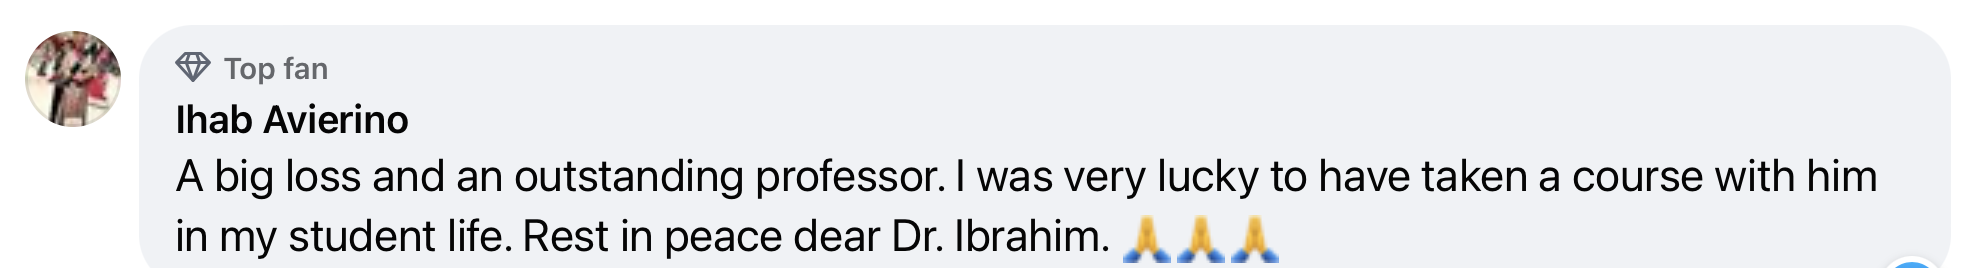 Text reads: A big loss and an outstanding professor. I was very lucky to have taken a course with him in my student life. Rest in peace dear Dr. Ibrahim.